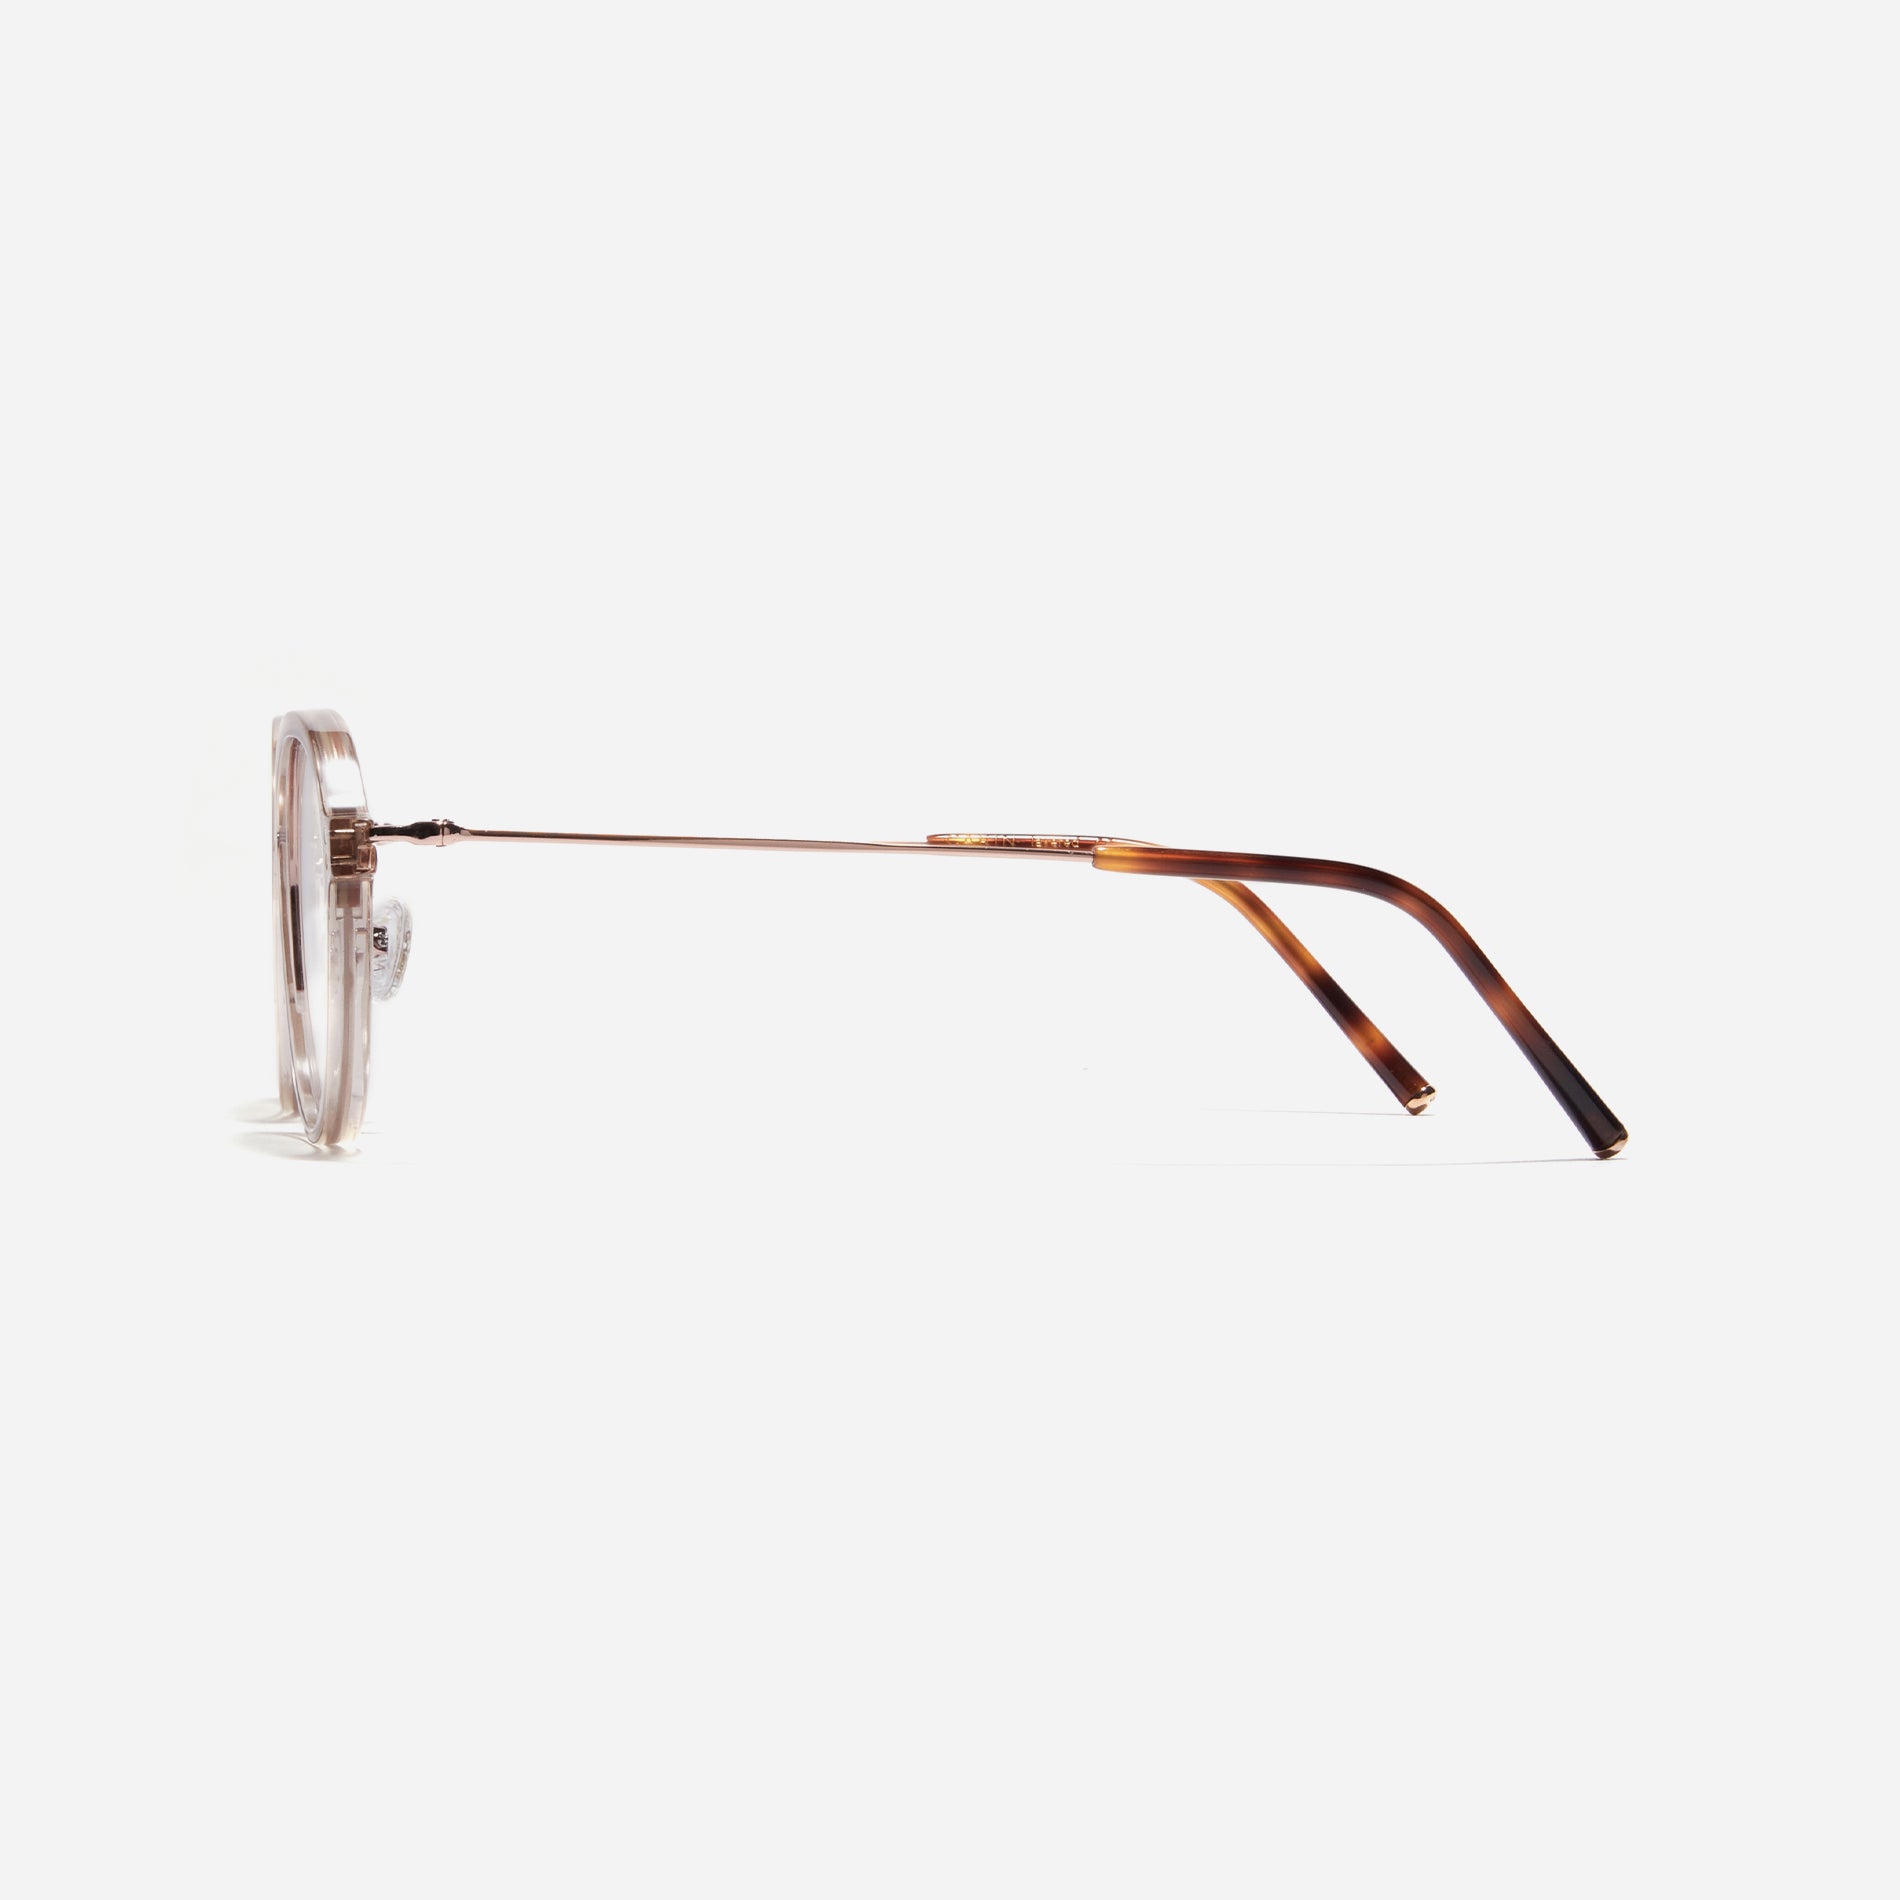 Round-shaped eyeglasses with a dual-combi structure inspired by from the aesthetics of platform shoes. Their dual-rim structure seamlessly accommodates thick lenses for higher prescriptions, while retro vibes are accentuated by side color accents.